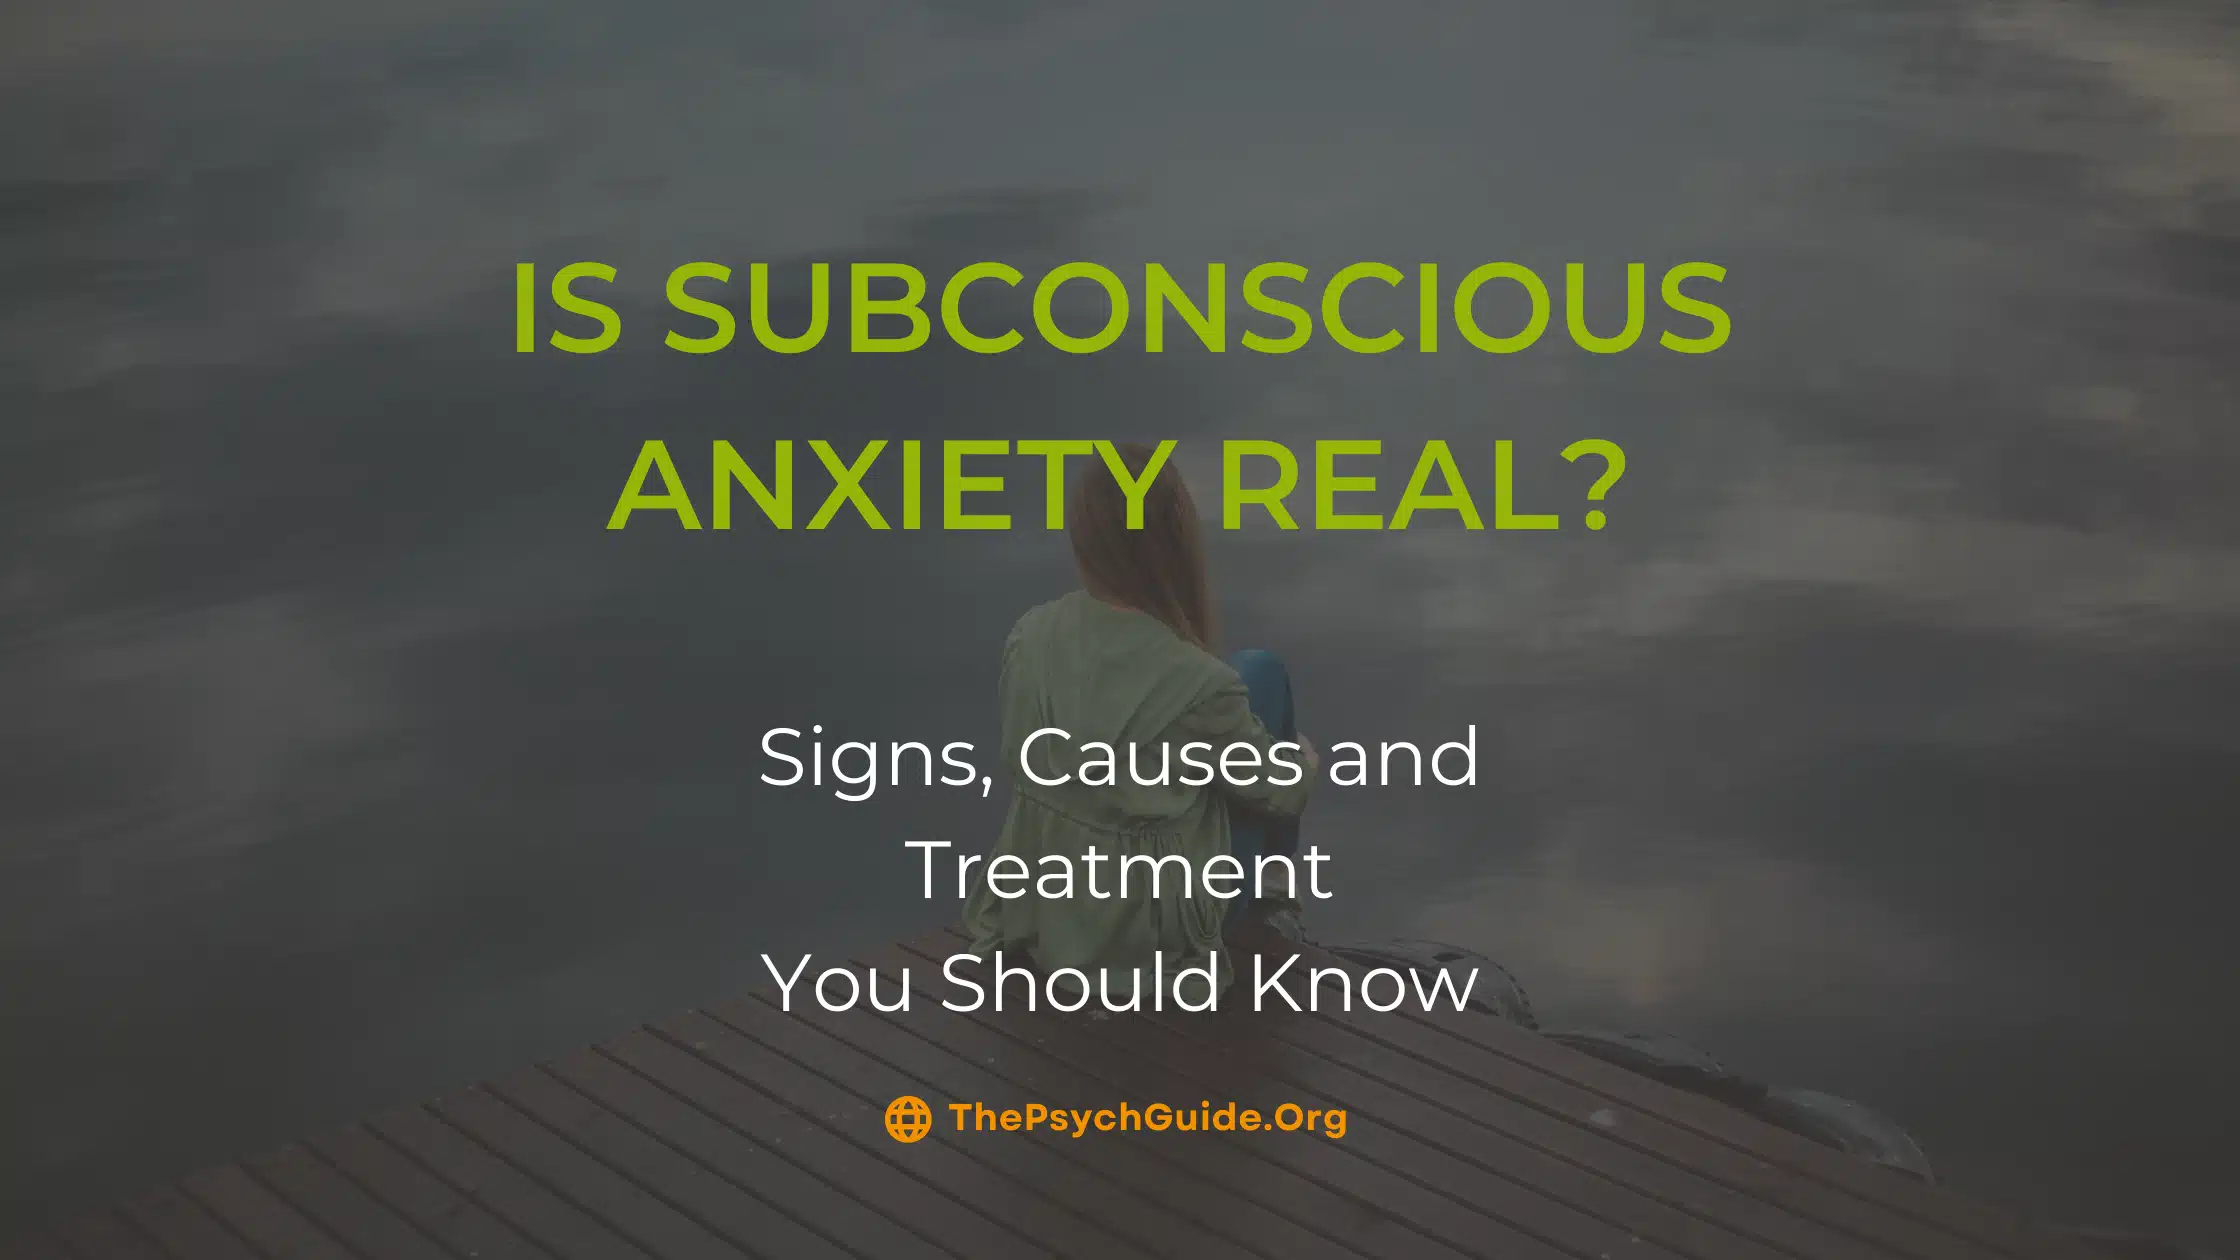 Subconscious Anxiety: What It Is and How to Recognize It